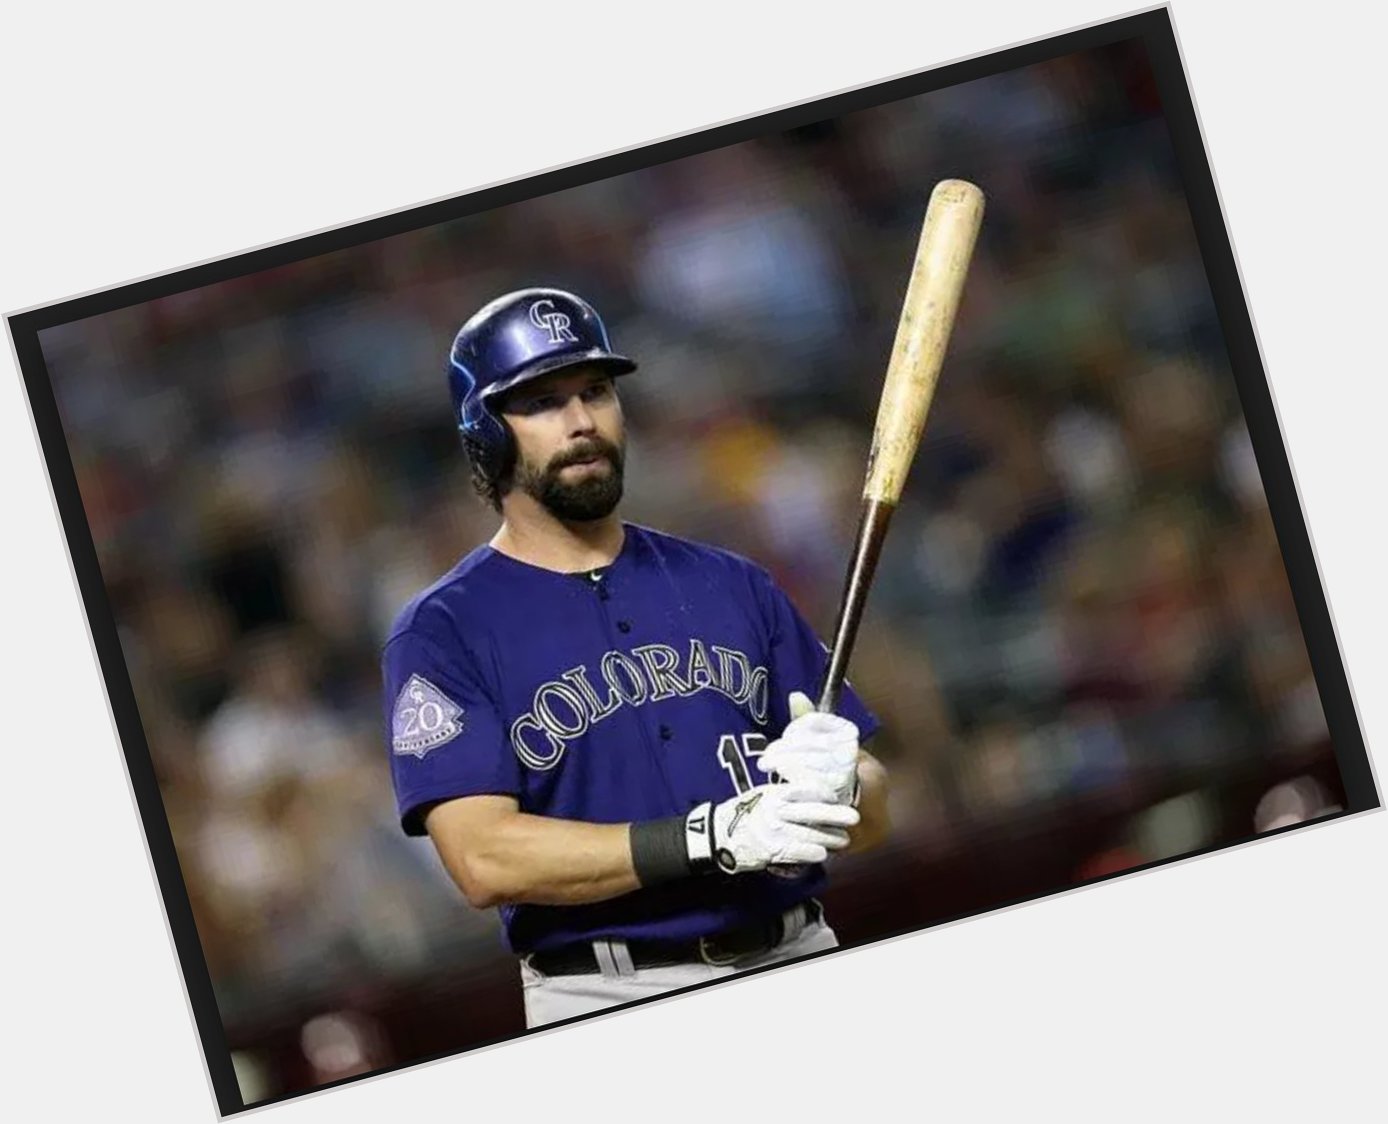 44 years old today. 2,519 hits. 369 HR\s. 1,406 RBI\s. .316 BA. Happy birthday to Rockies legend, Todd Helton! 